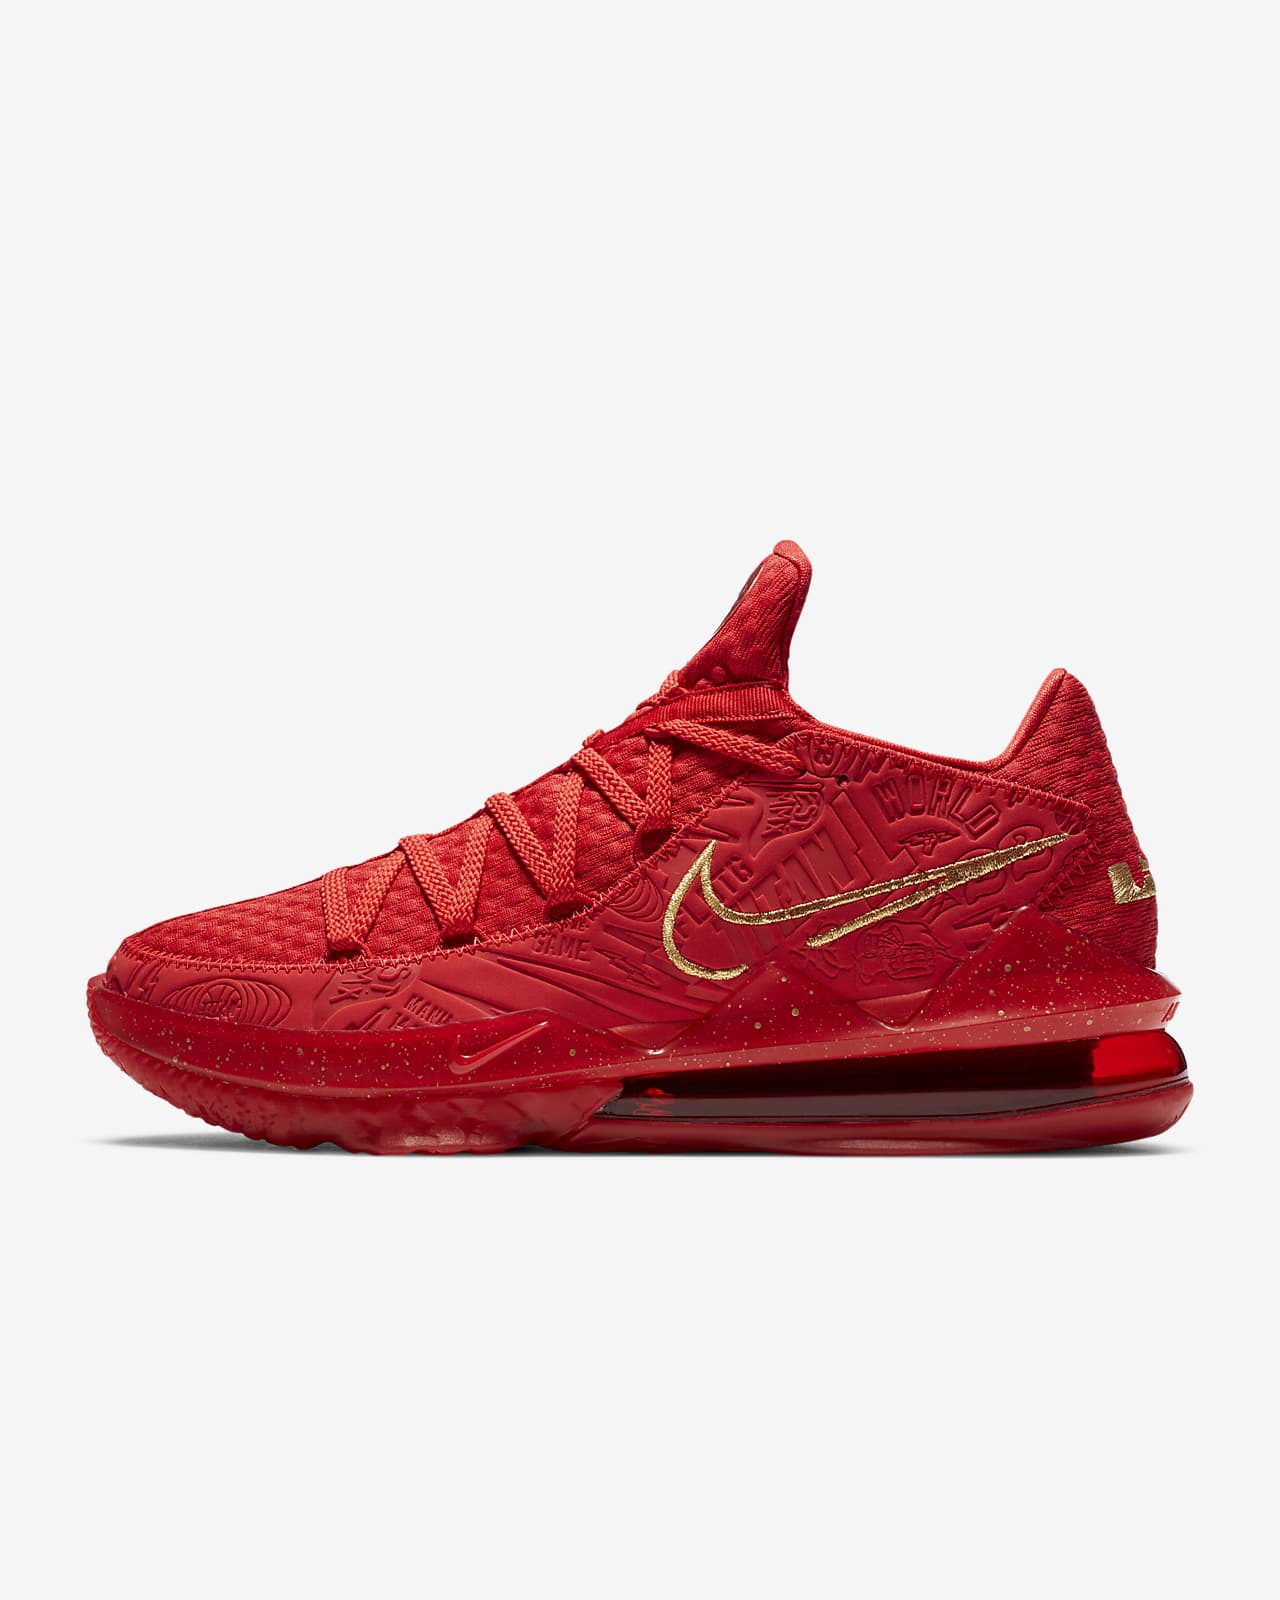 lebron shoes all red